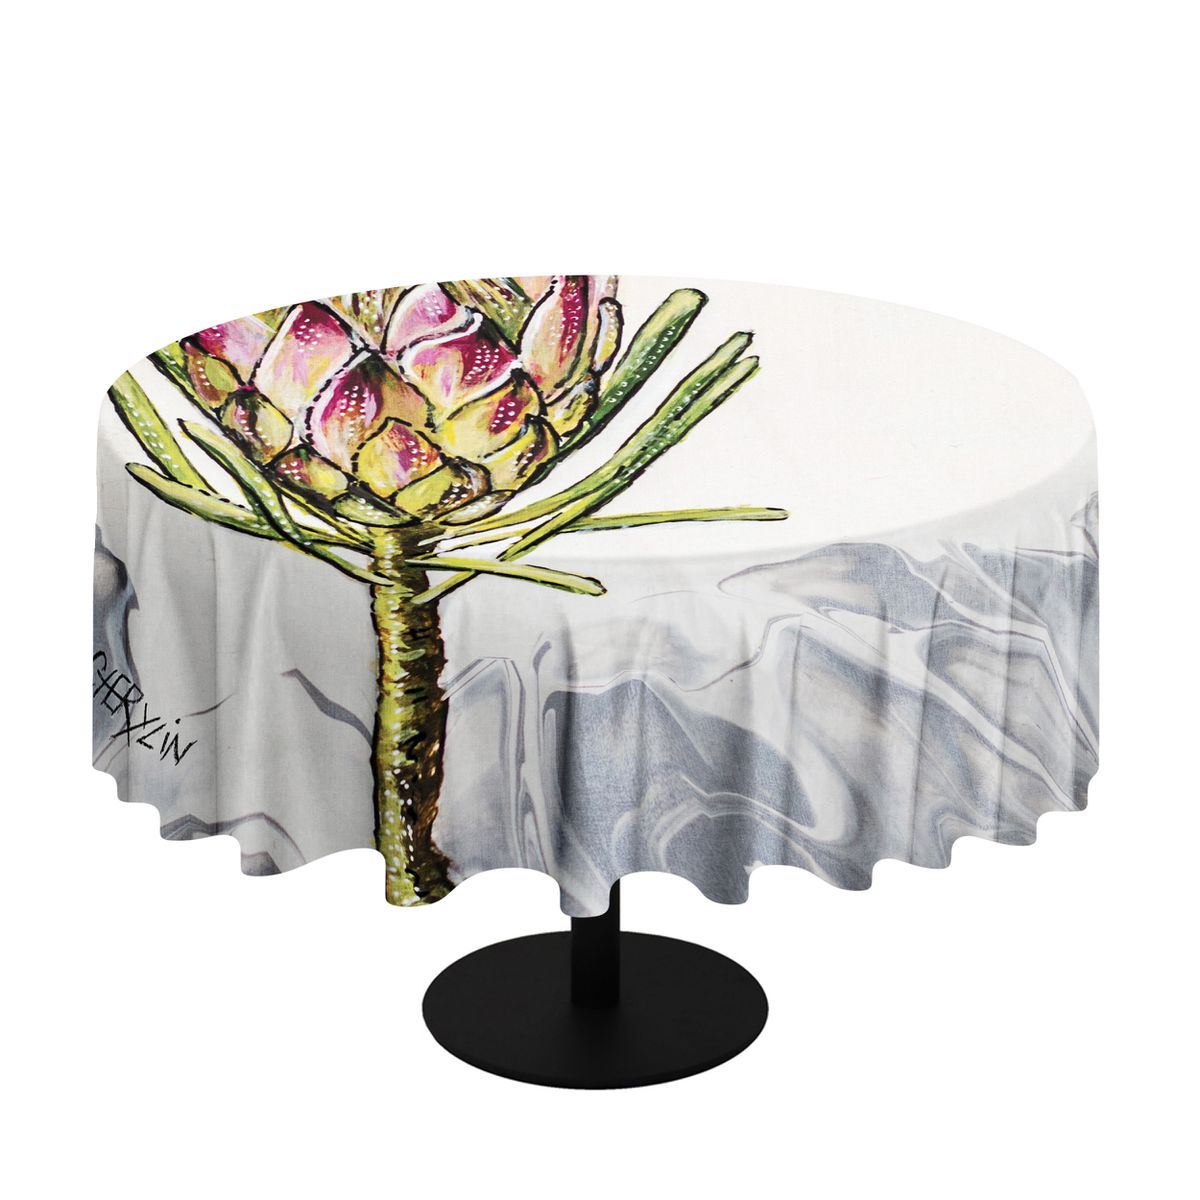 Protea By Cherylin Louw Round Tablecloth